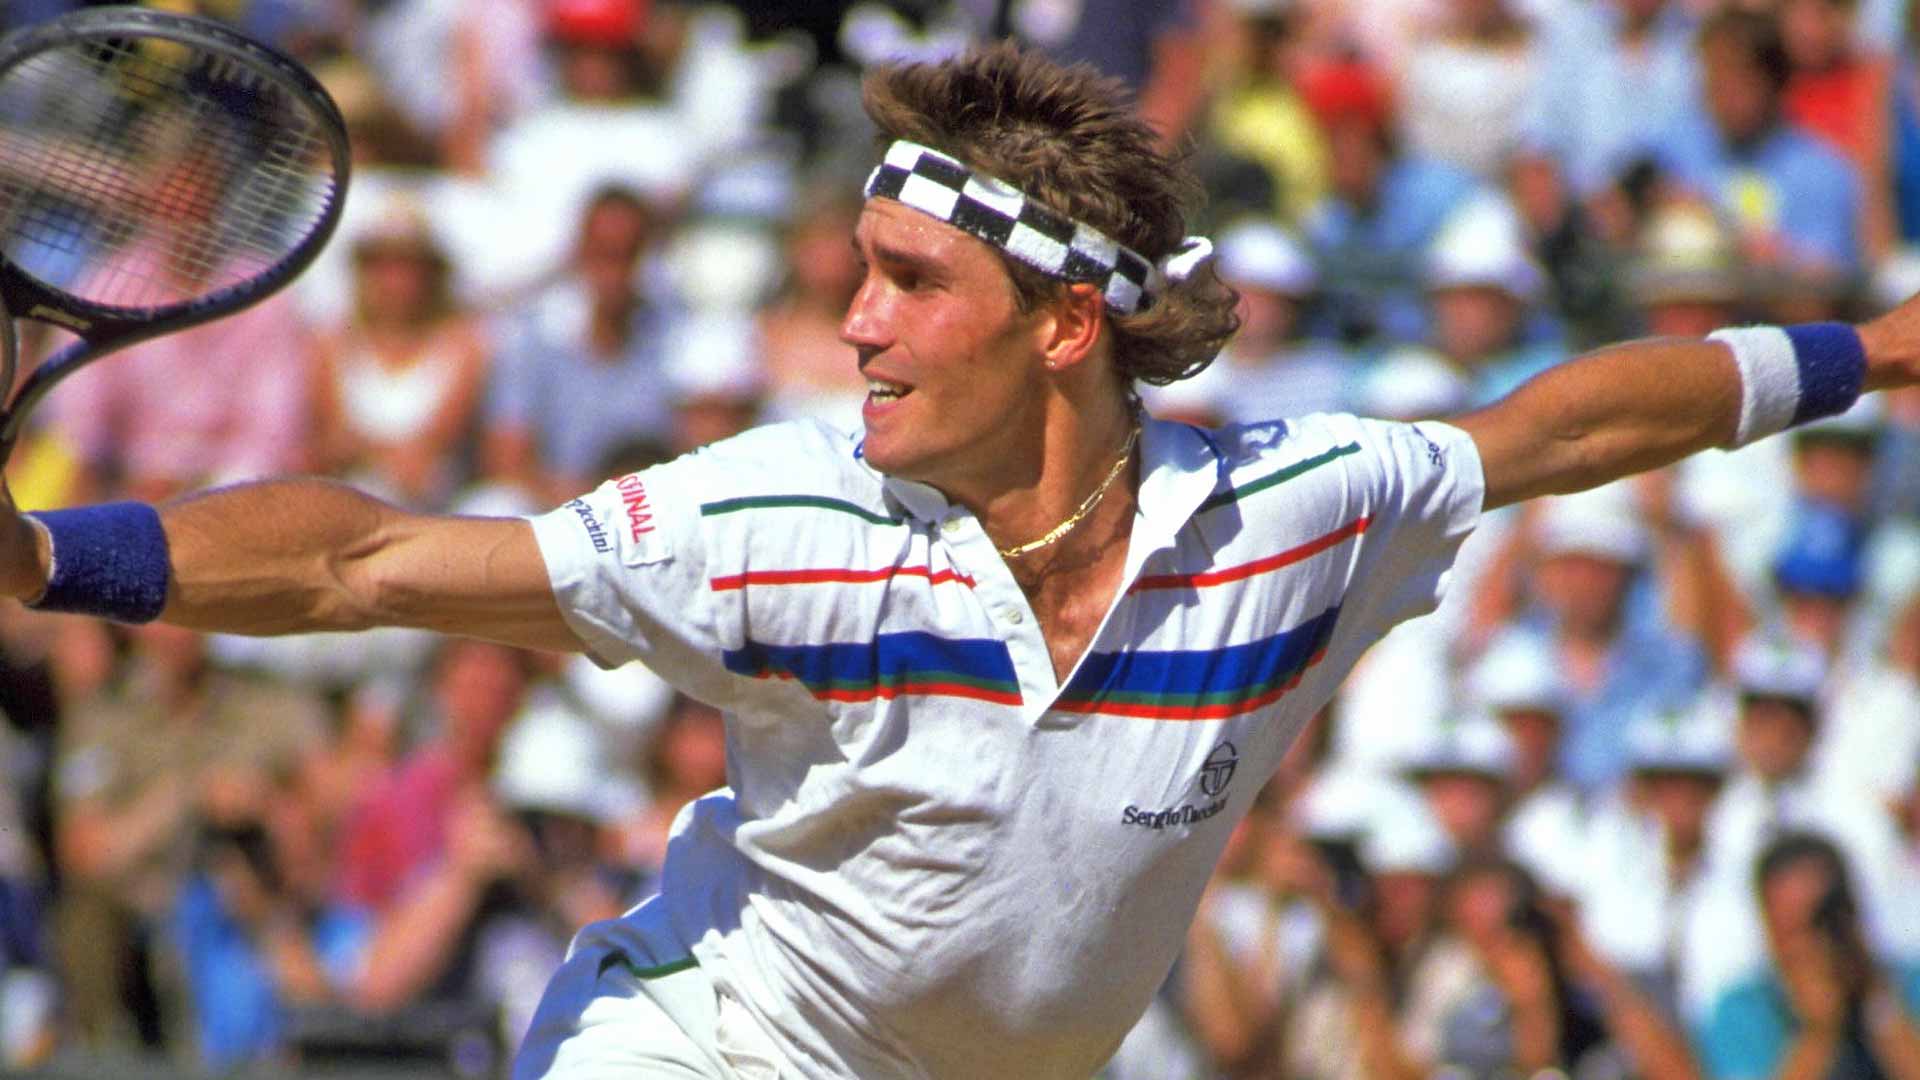 On Sunday, 5 July 1987, Pat Cash beat World No. 1 Ivan Lendl for the title at The Championships, Wimbledon.